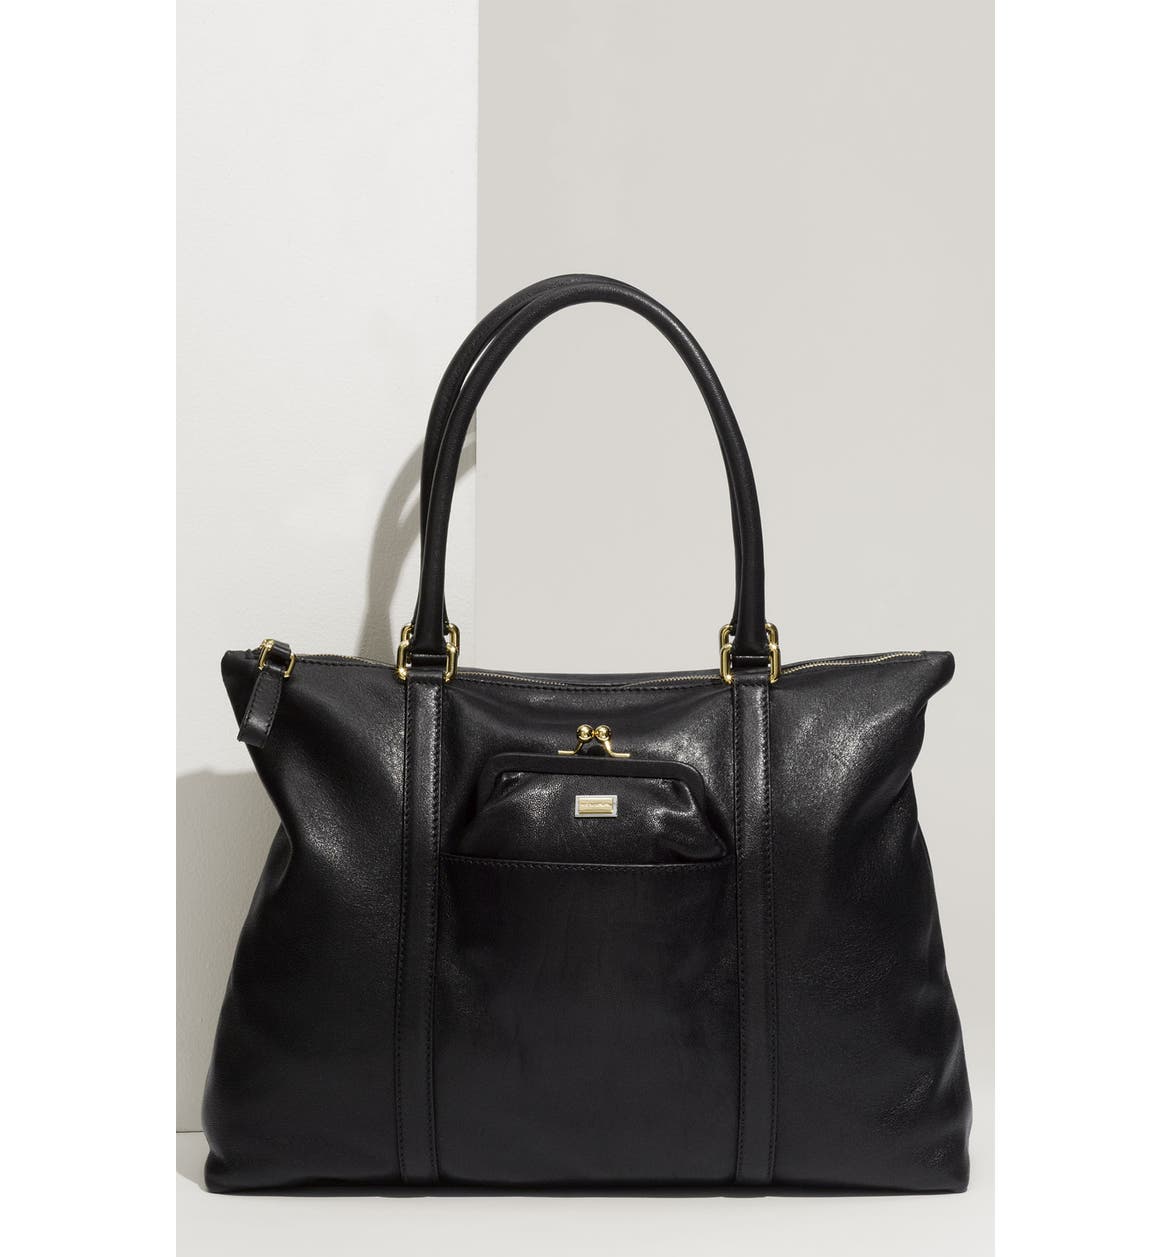 Dolce&Gabbana 'Miss Pen' Leather Tote | Nordstrom